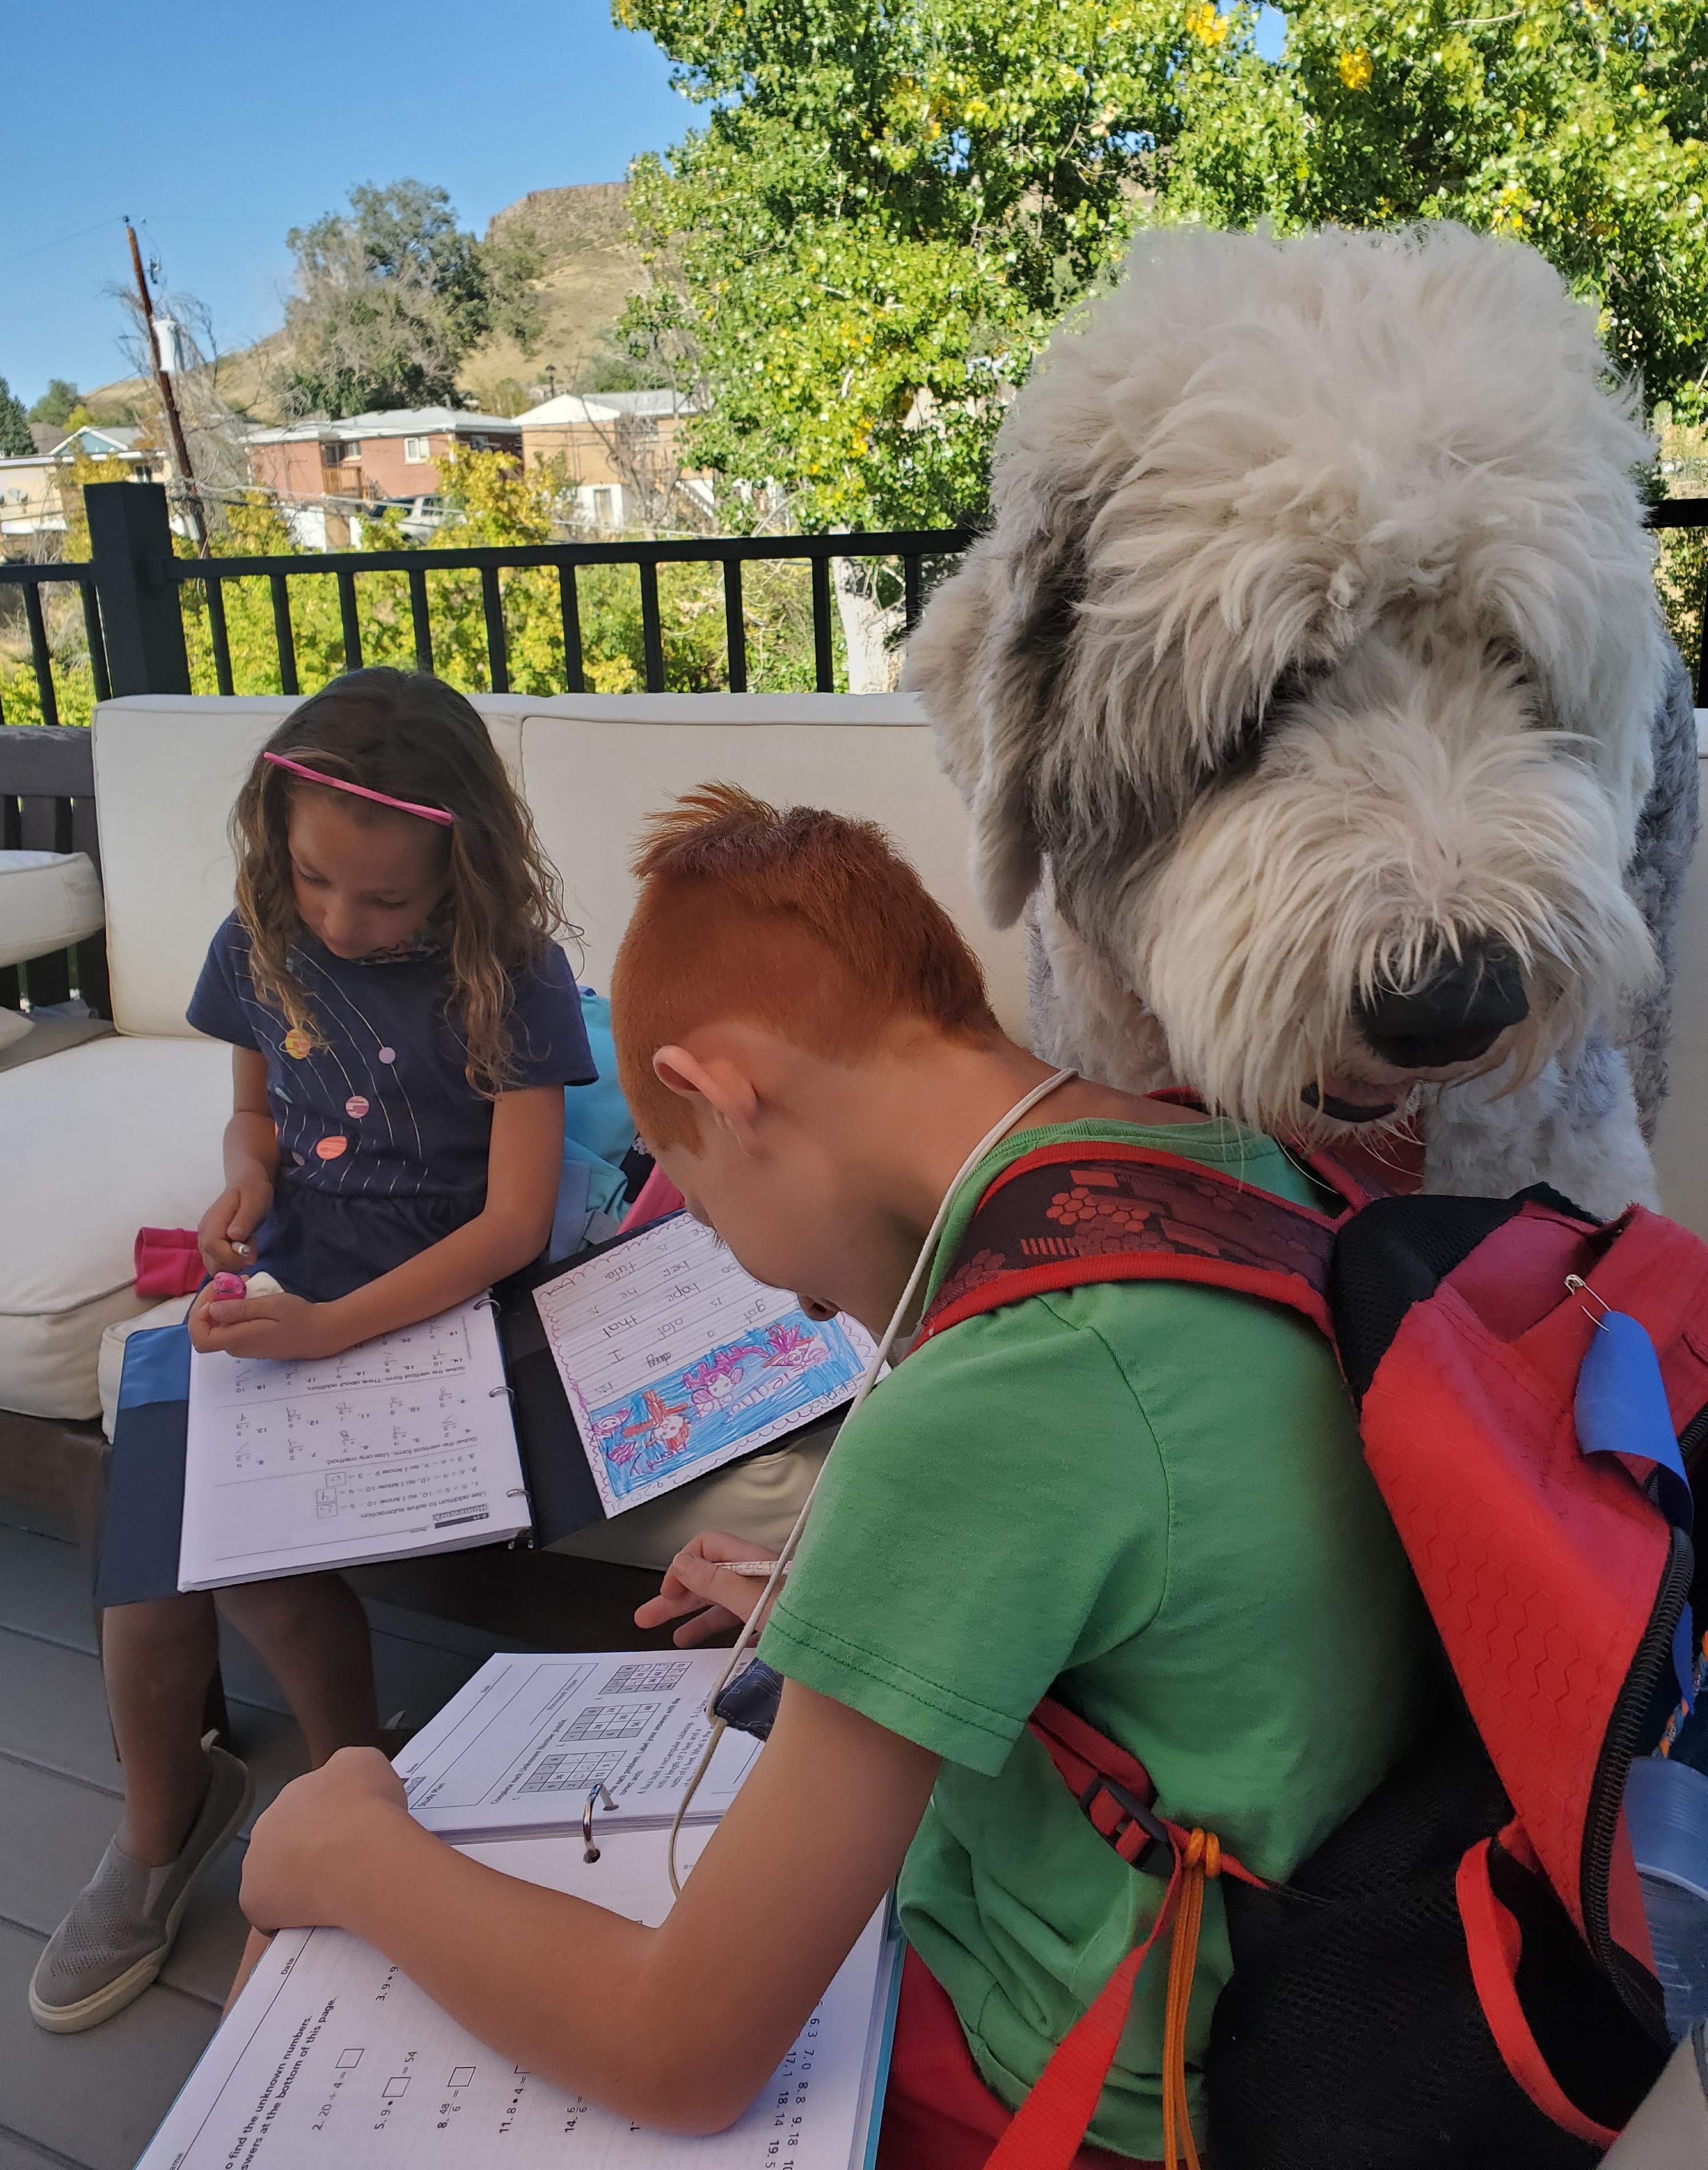 Photo of a very large, fluffy white dog who is sitting practically on the lap of a boy trying to  look at his binder and do homework. His sister sits on the chair next to them, doing her homework as well.